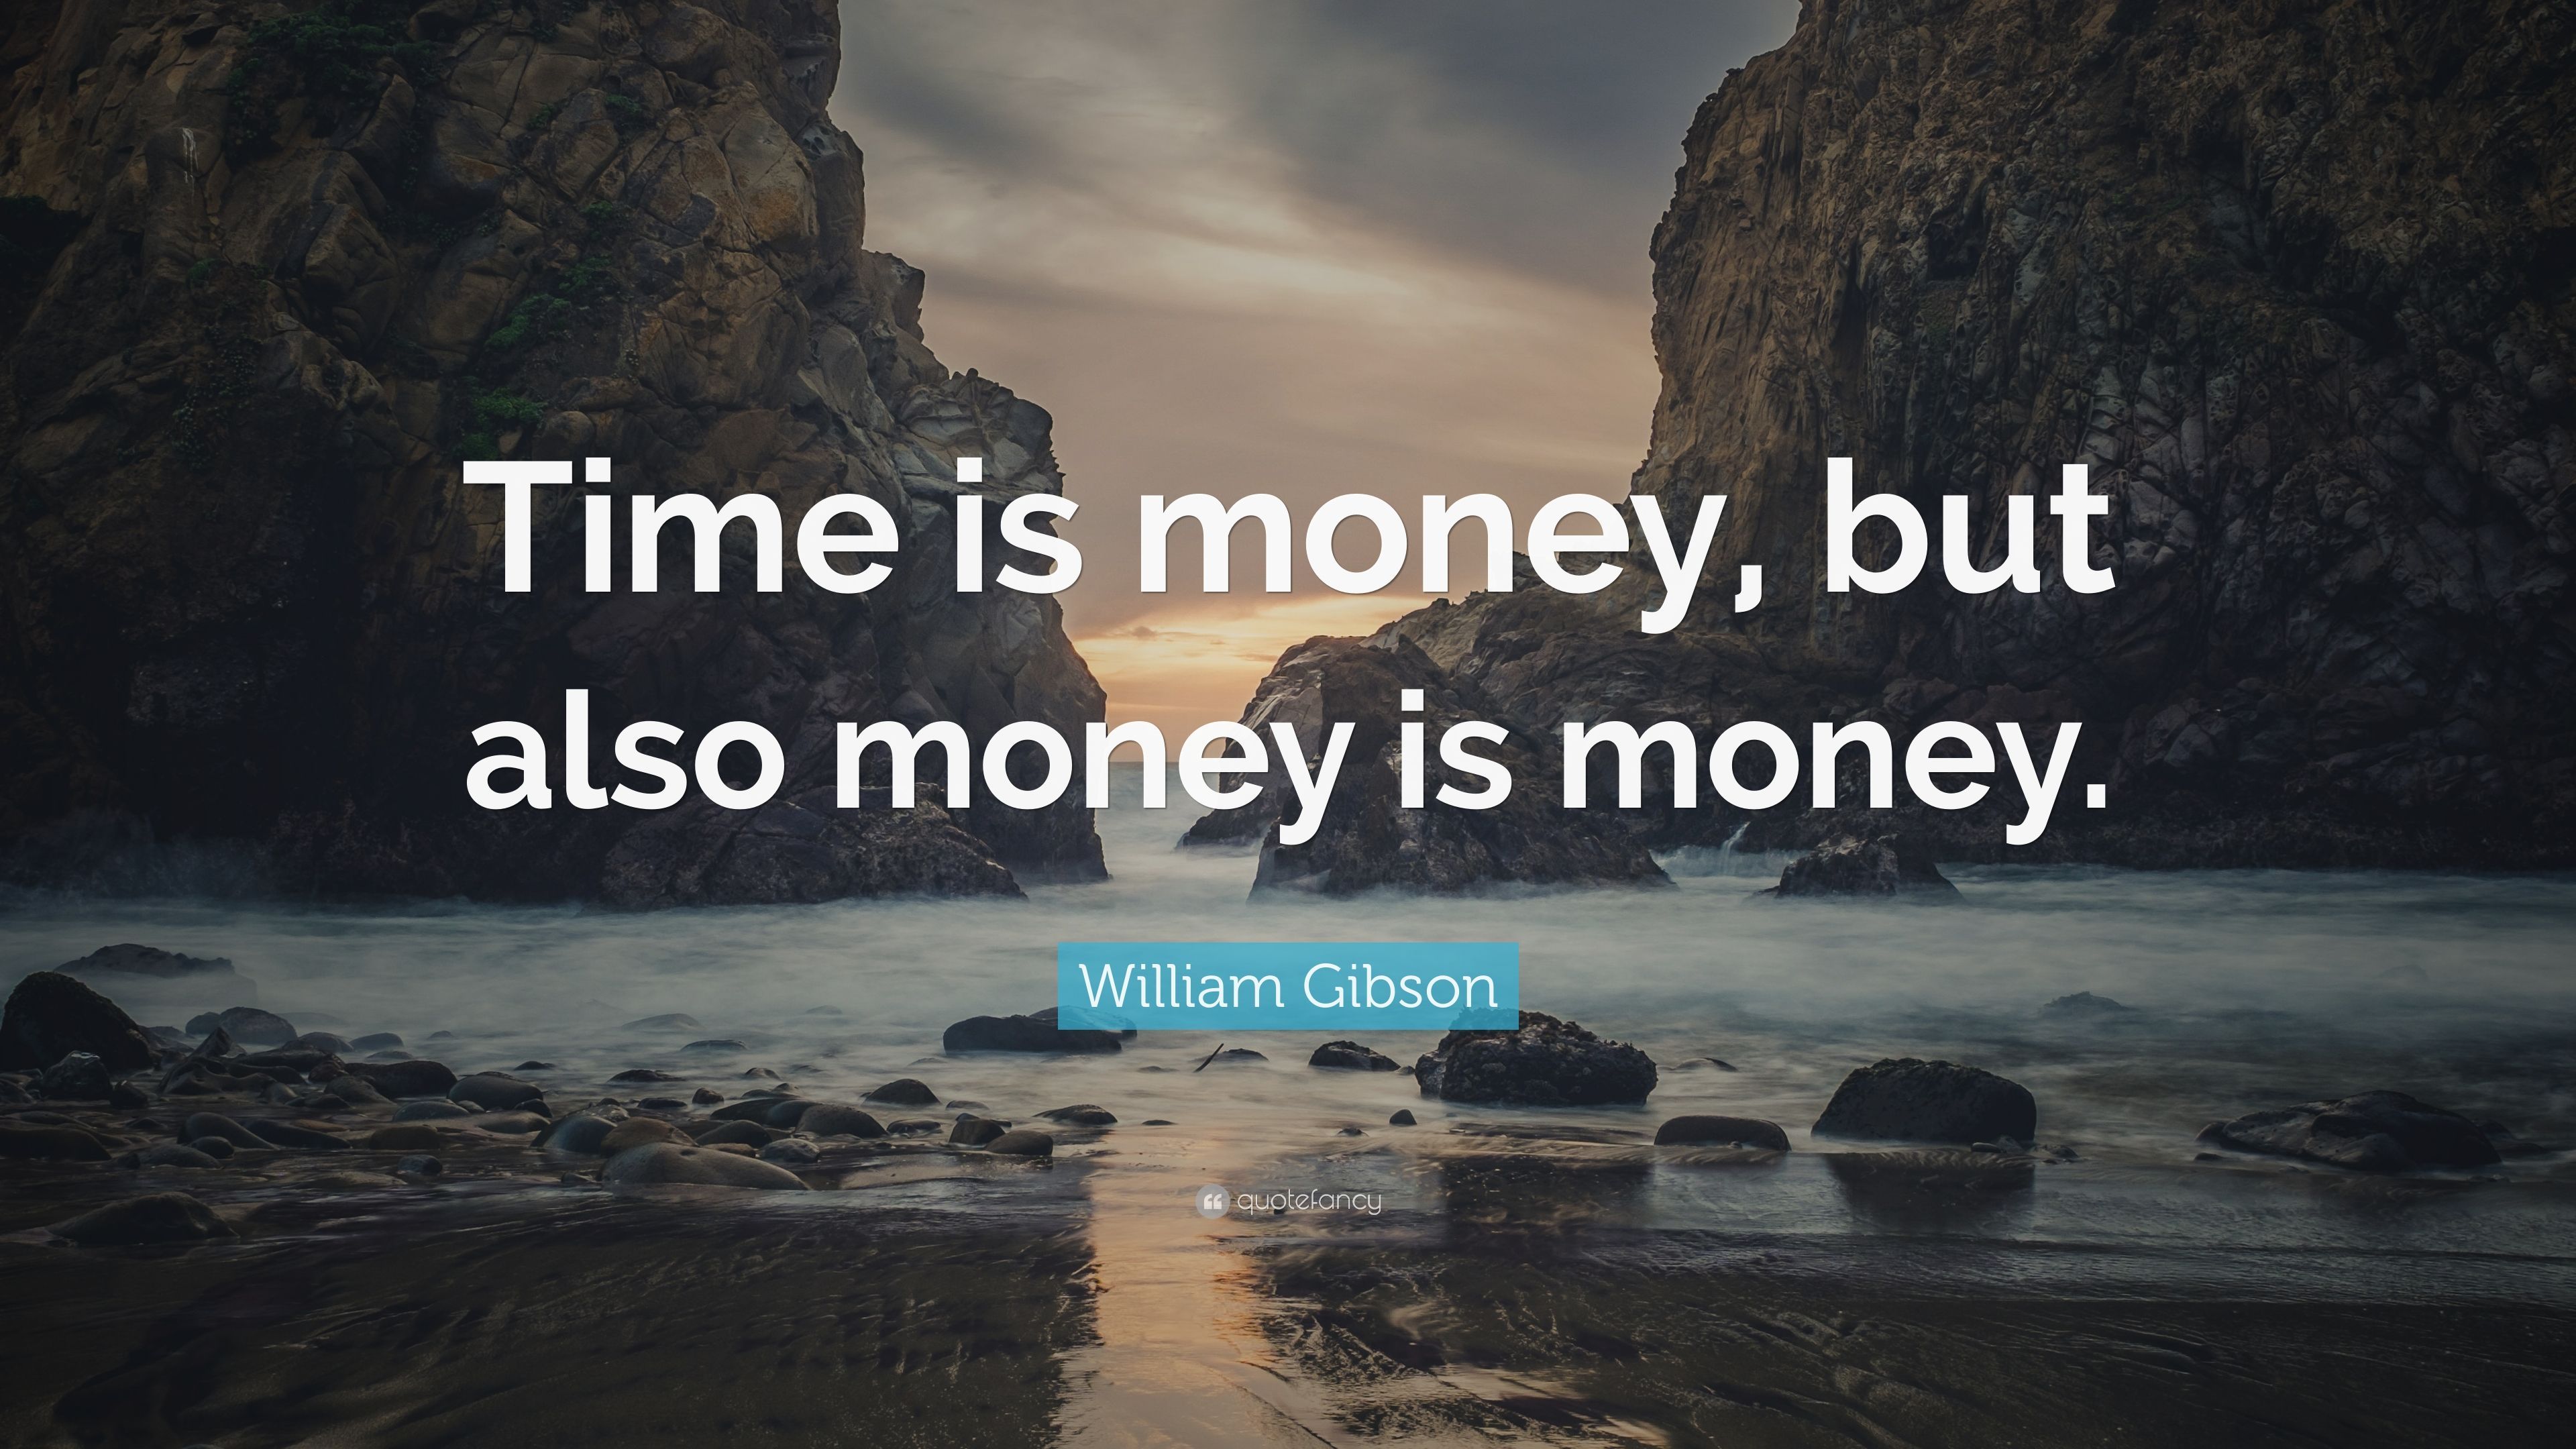 William Gibson Quote: “Time is money, but also money is money.” (6 wallpaper)